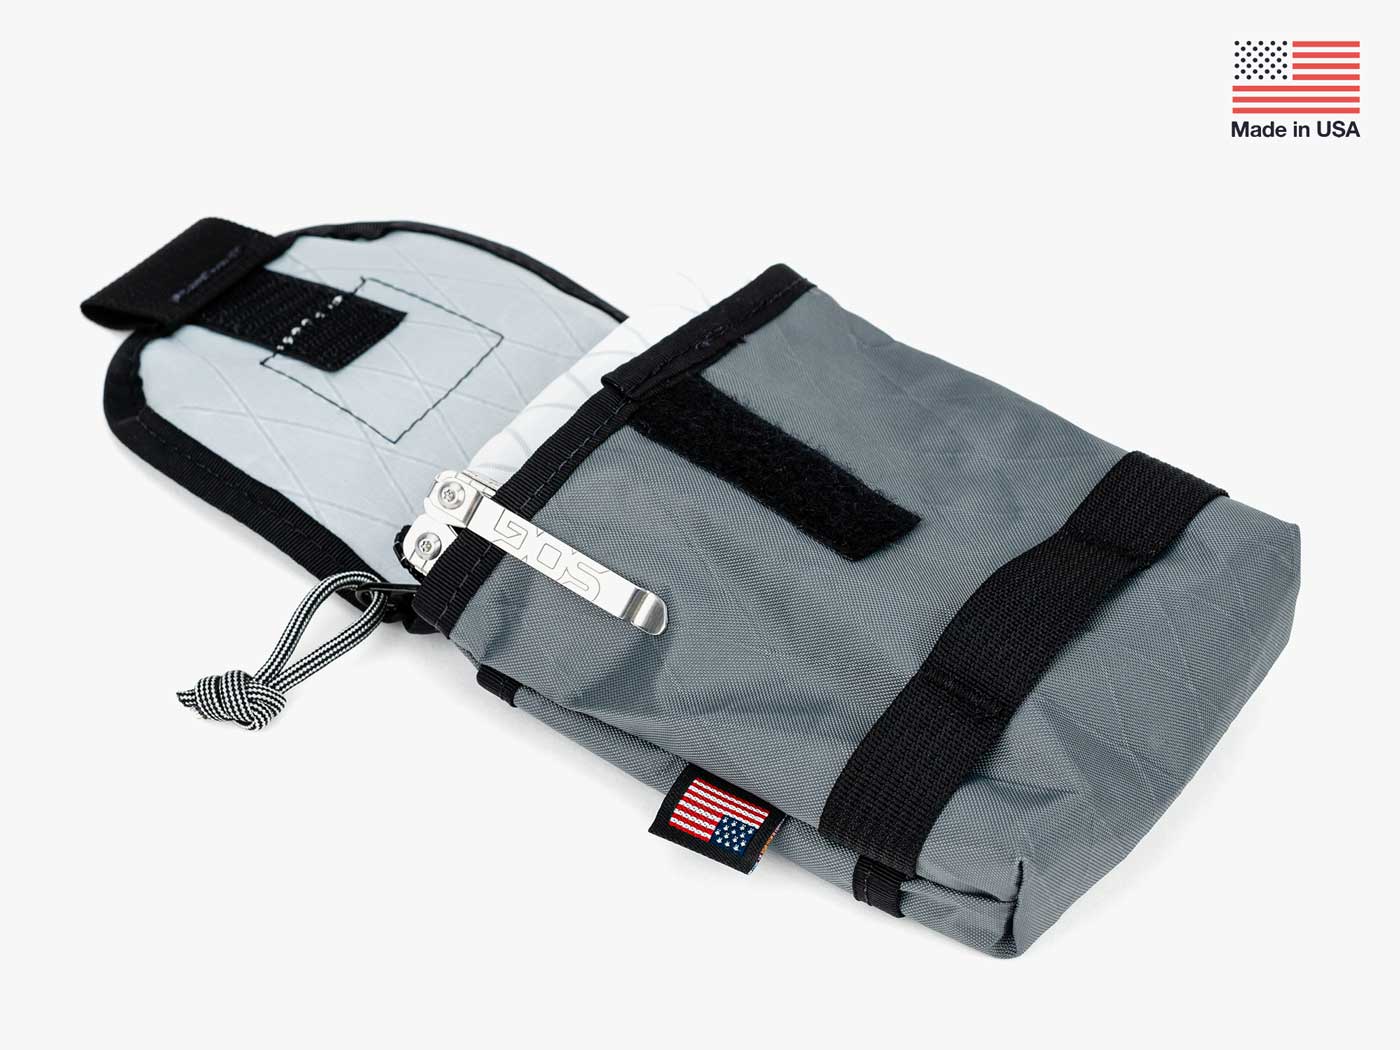 Utility Pouch